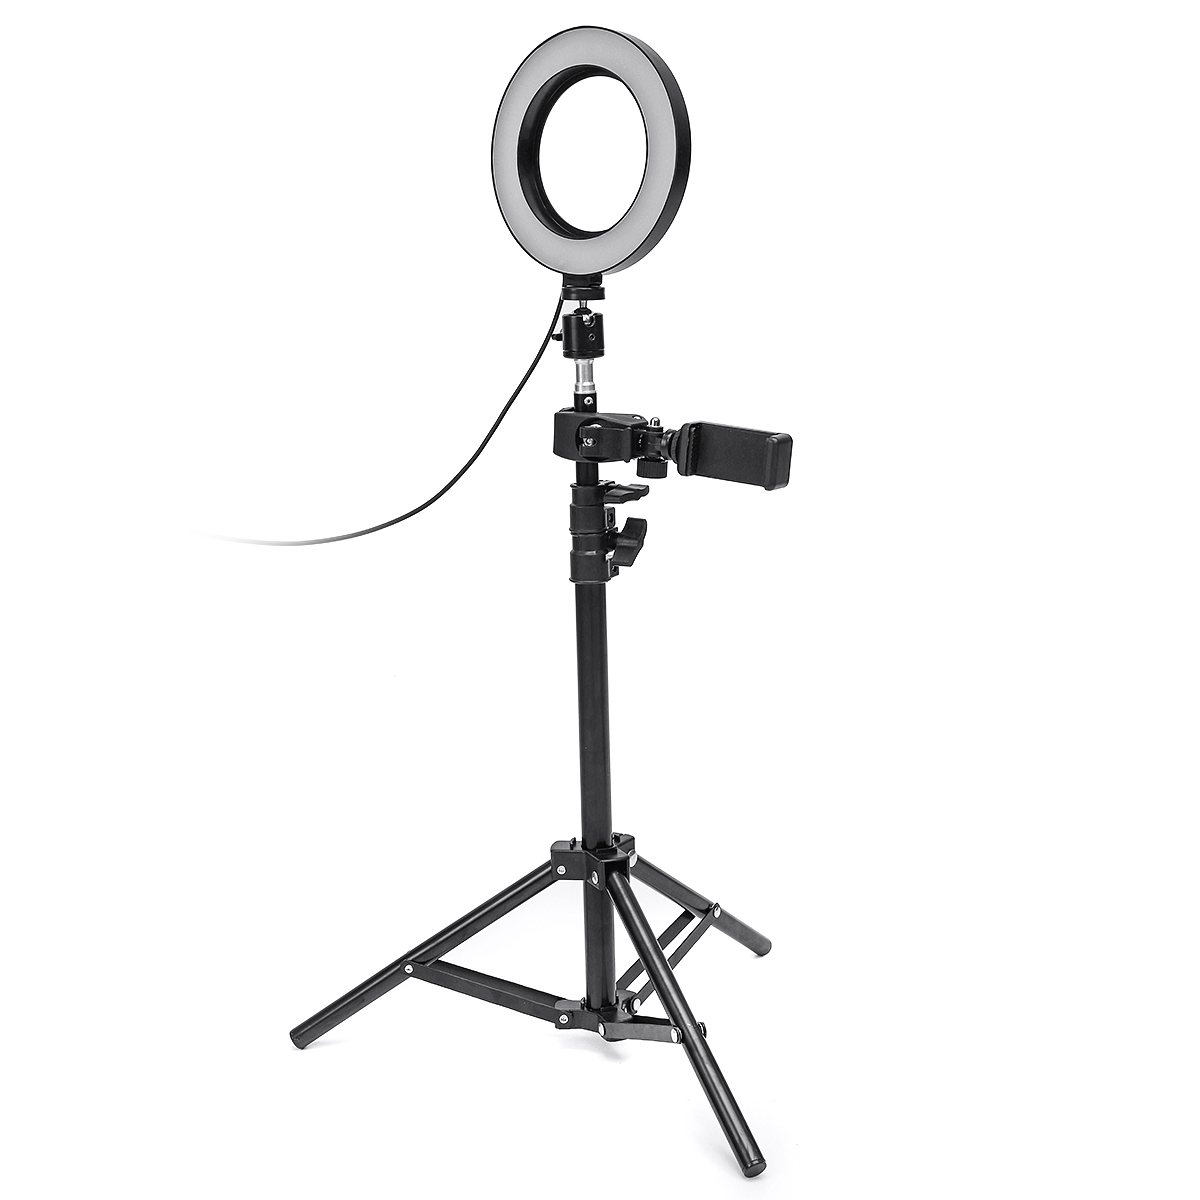 Dimmable-LED-Studio-Camera-Ring-Light-Makeup-Photo-Lamp-Selfie-Stand-USB-Plug-Tripod-with-Phone-Hold-1632867